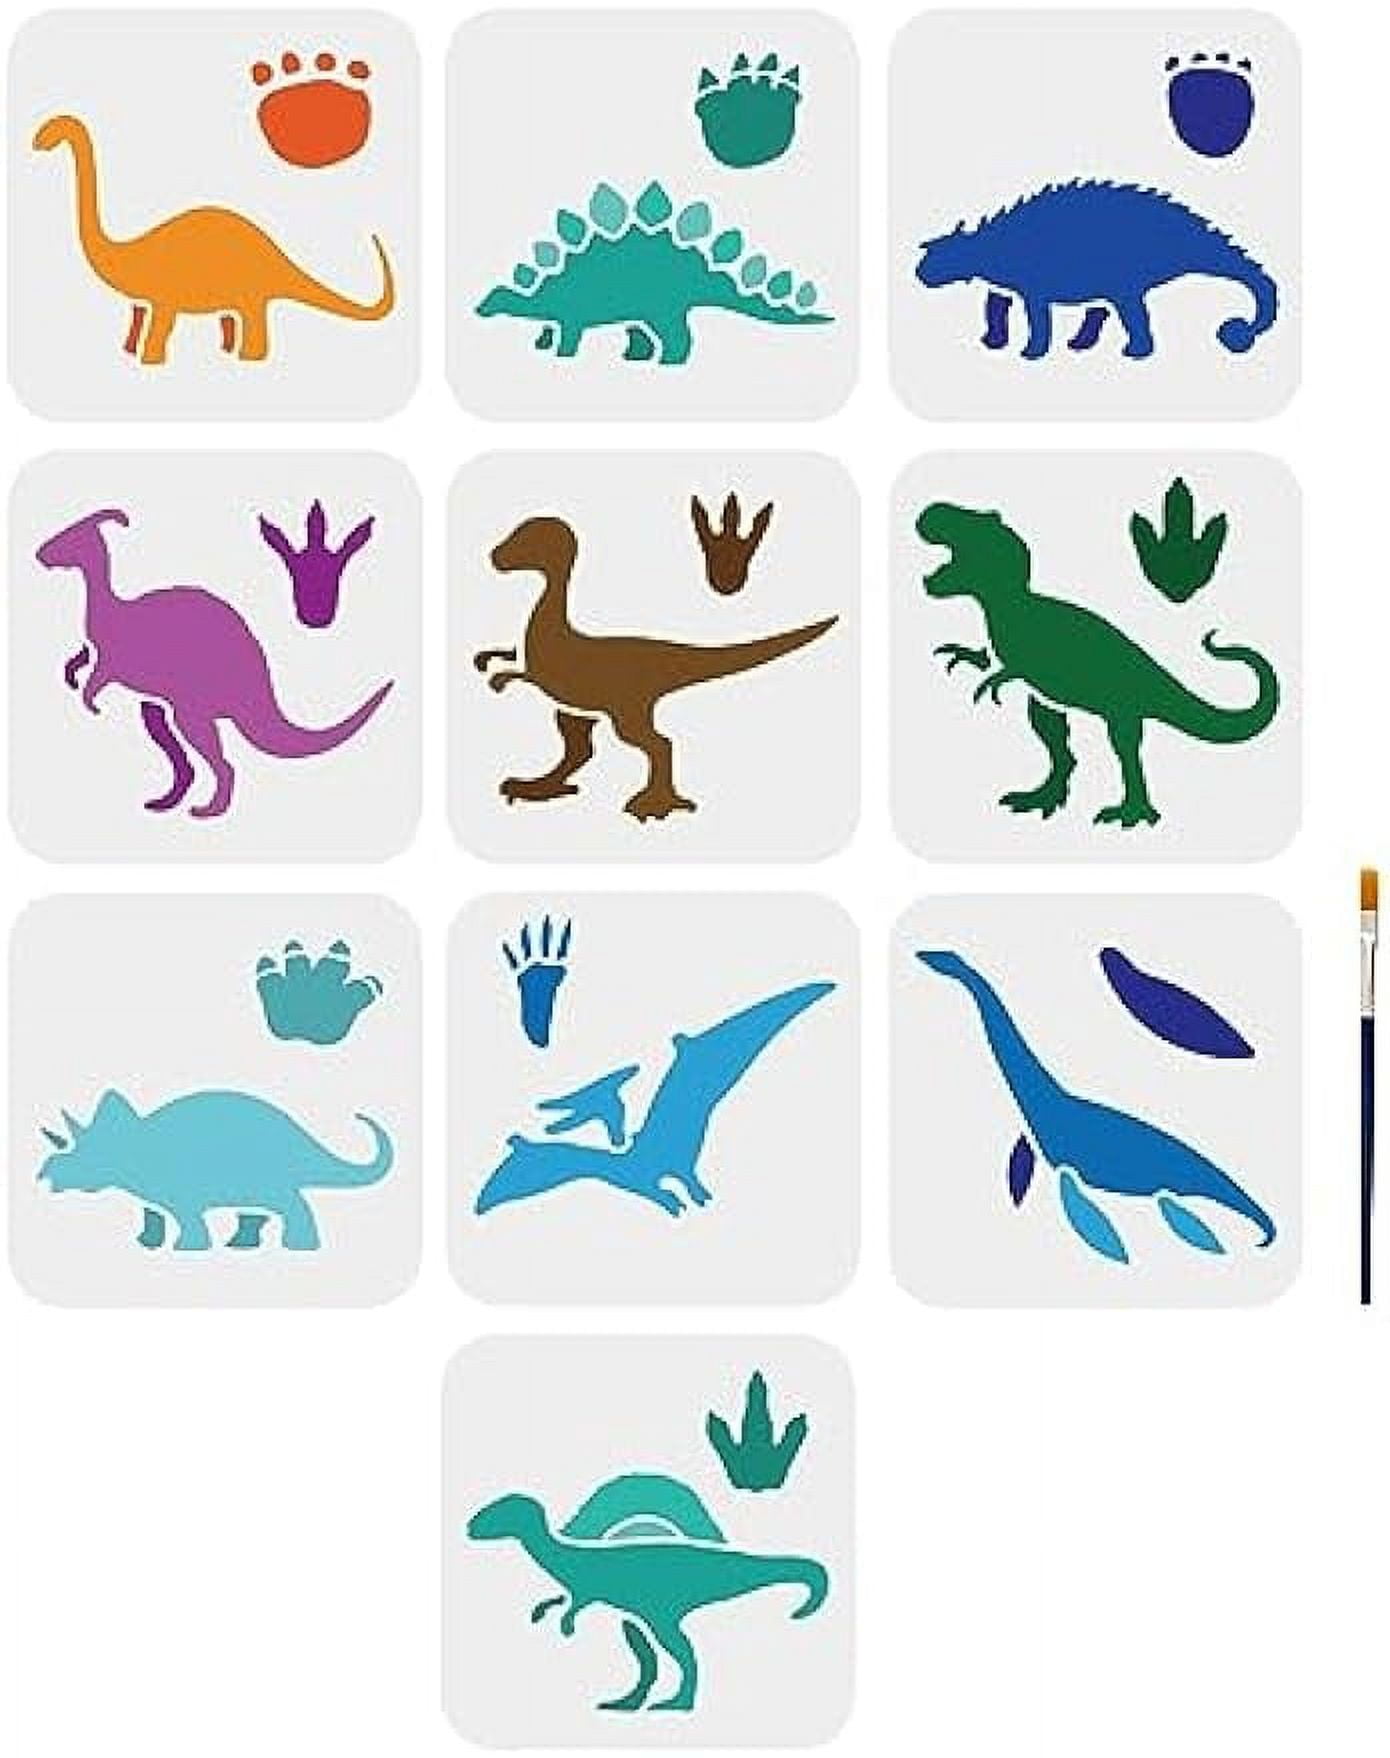 How to make a DIY phone case with dinosaur stencils, Tutorial for kids  crafts ideas